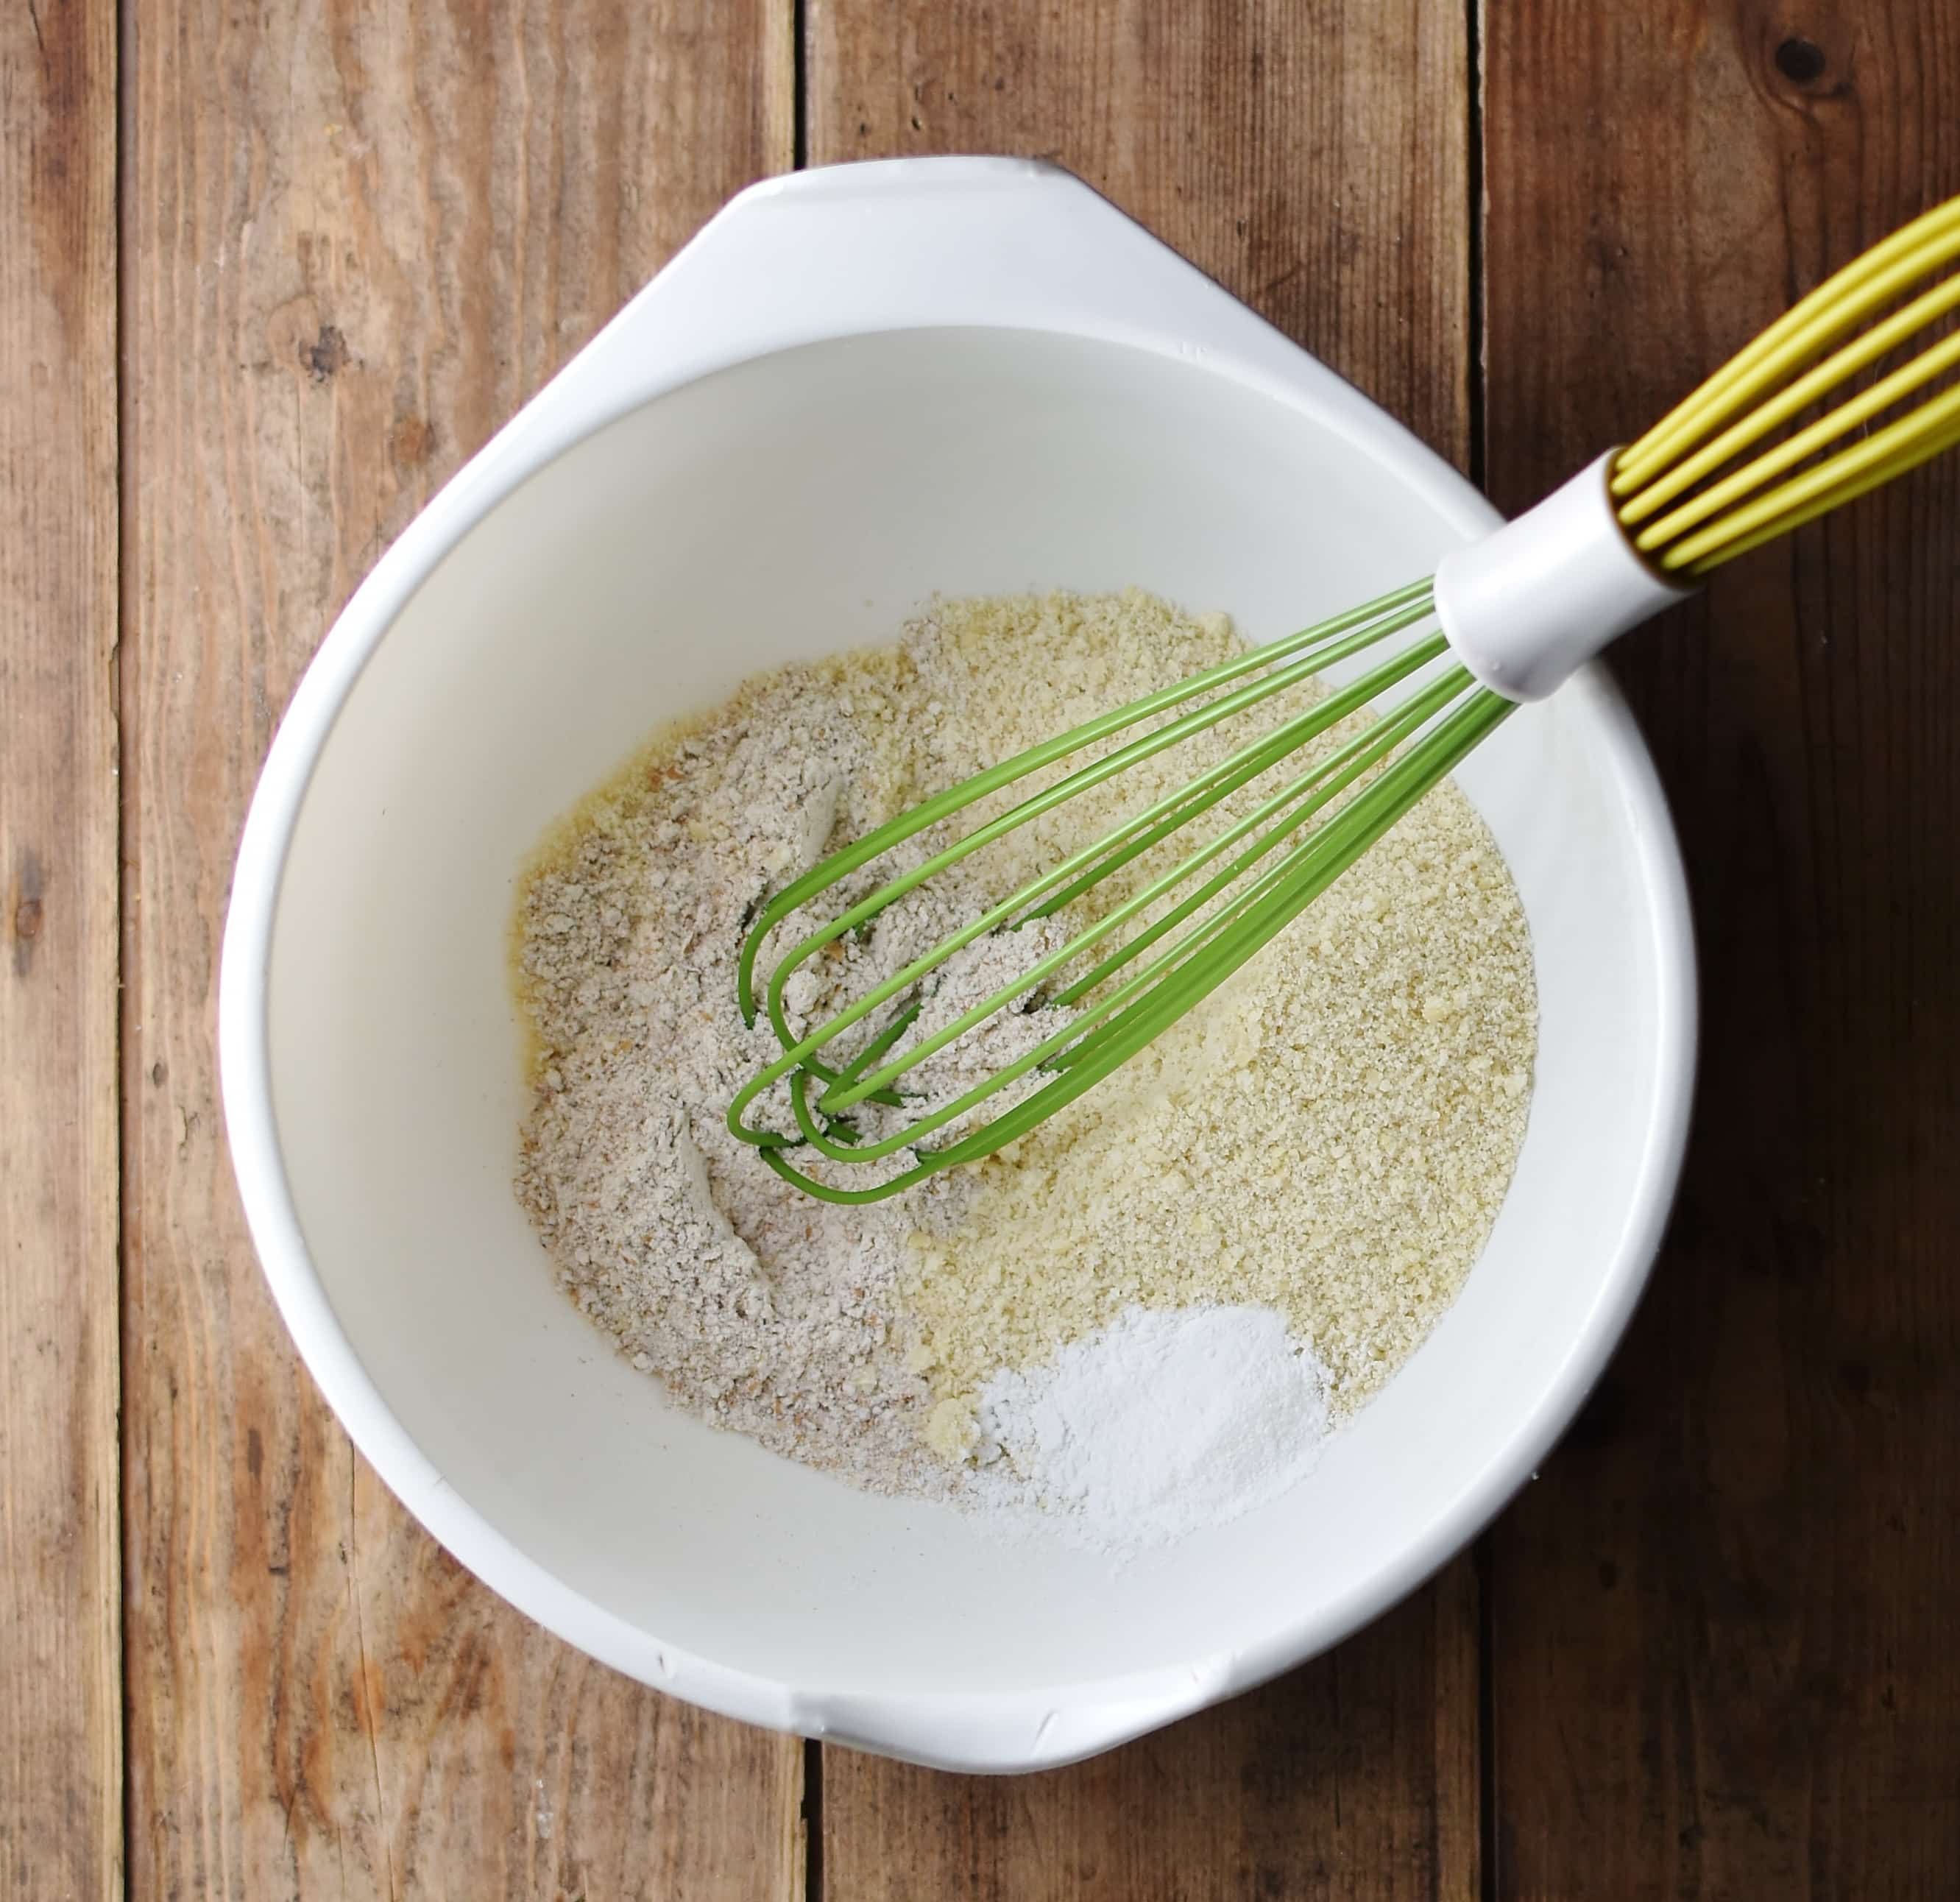 Flour mixture with green whisk on large white bowl.